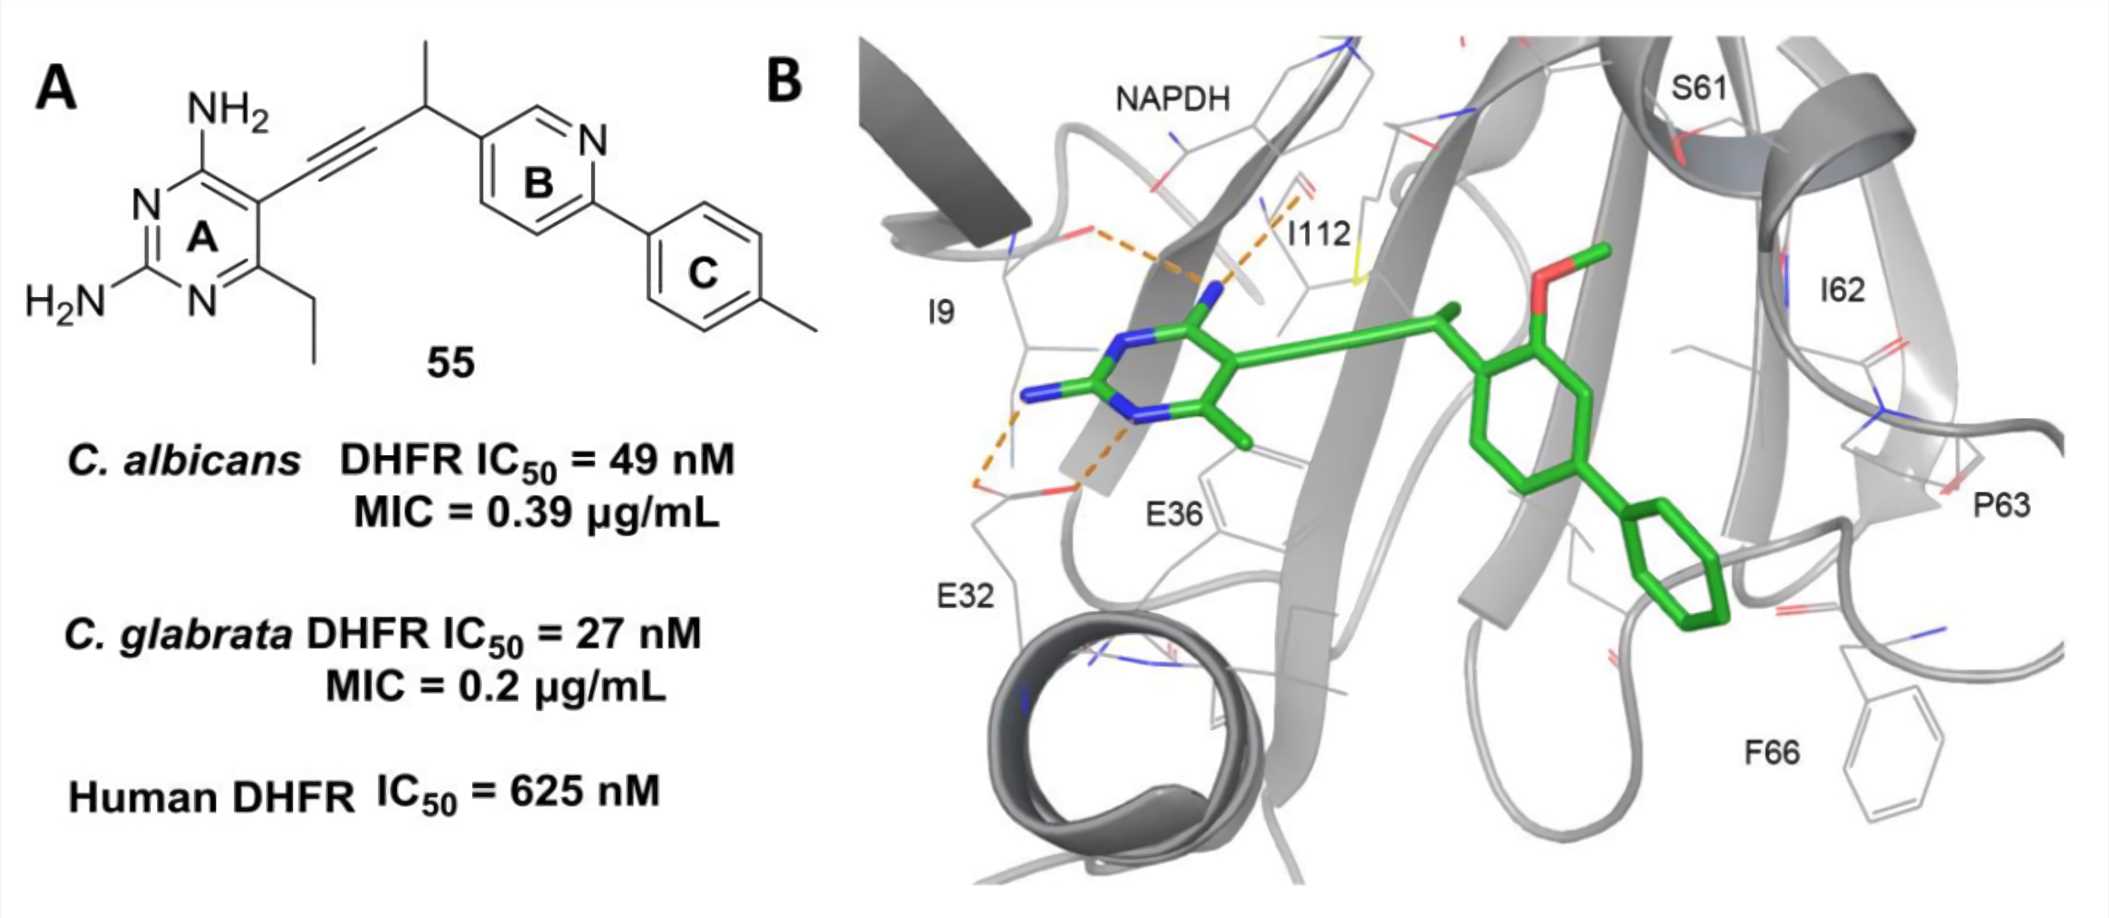 DHFR as a potential antifungal target. (A) Chemical structures and antifungal activity of fungal DHFR inhibitors. (B) Binding mode of a 2,4-diaminopyrimidine propargyl inhibitor with C. albicans DHFR (PDB 4HOF).